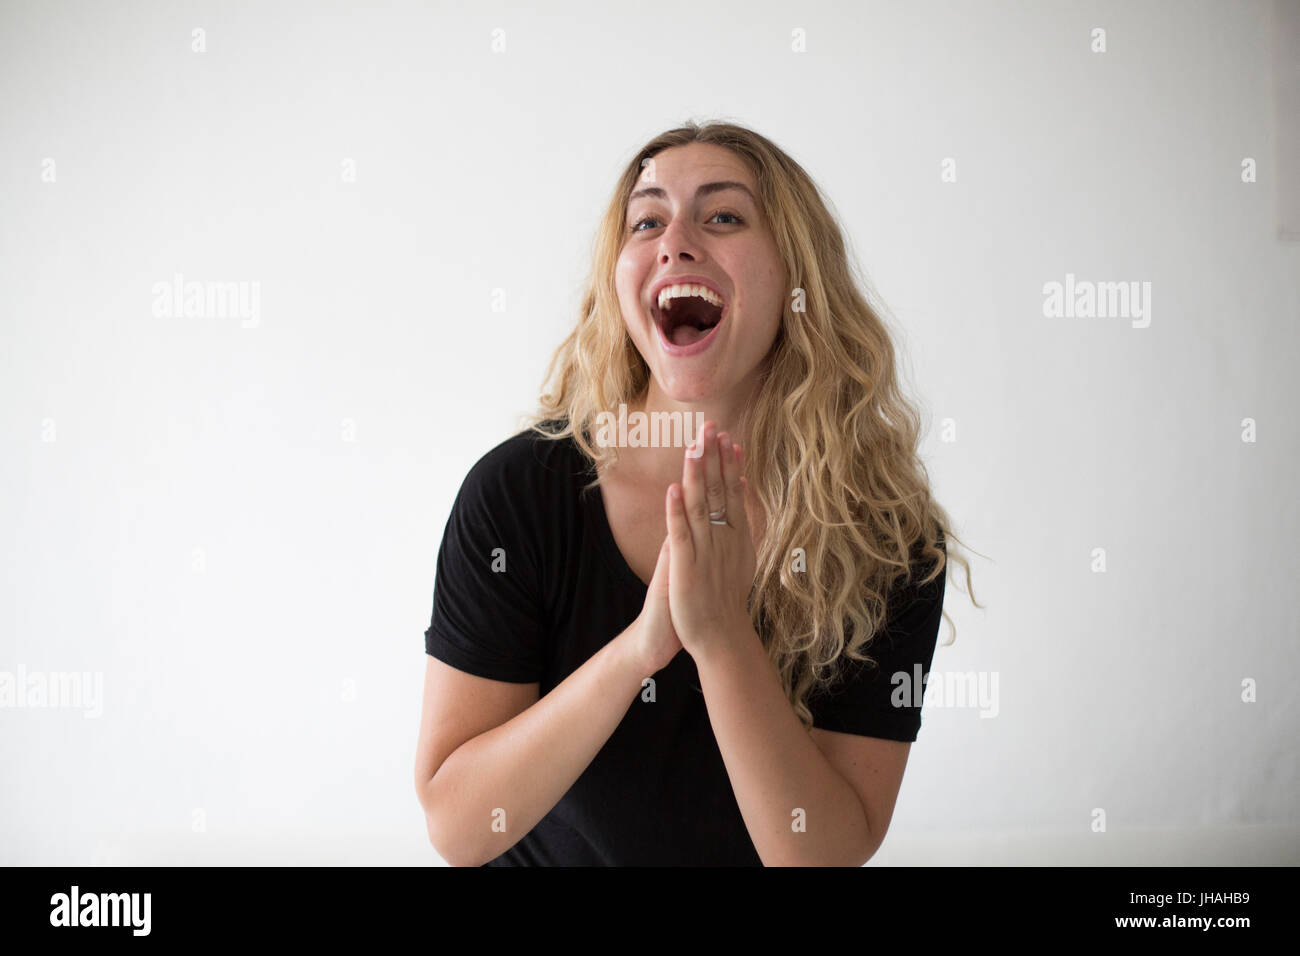 Young, blonde woman cheering and clapping in excitement and happiness against a white background in natural day light. A beautiful millenial. Stock Photo